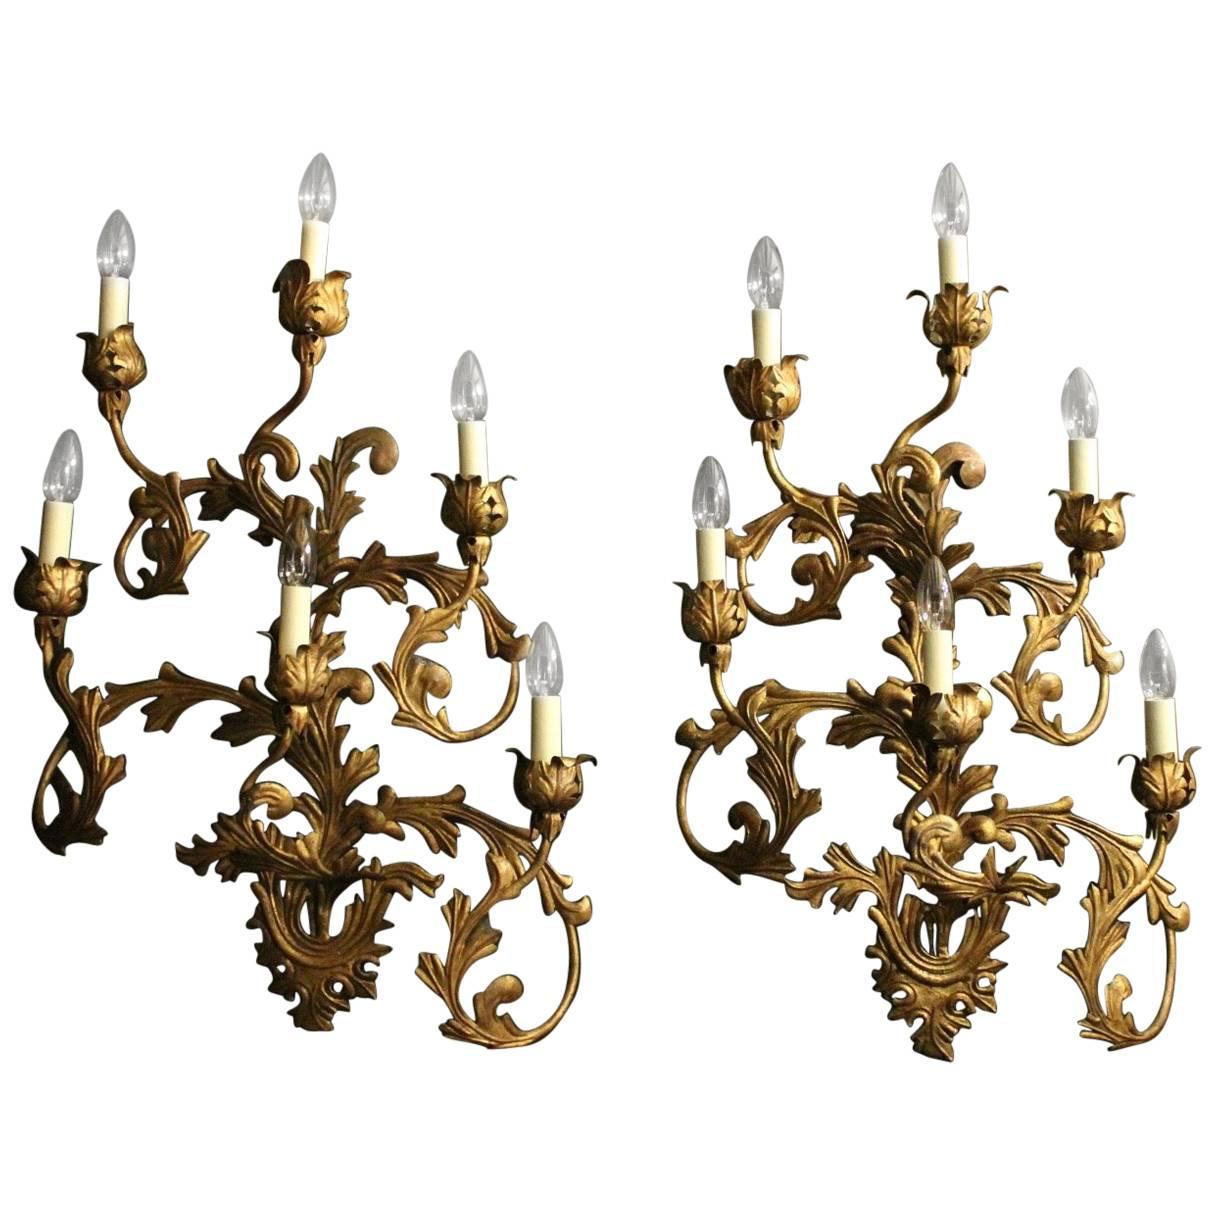 Florentine Large Pair of Gilded Six-Arm Leaf Wall Lights